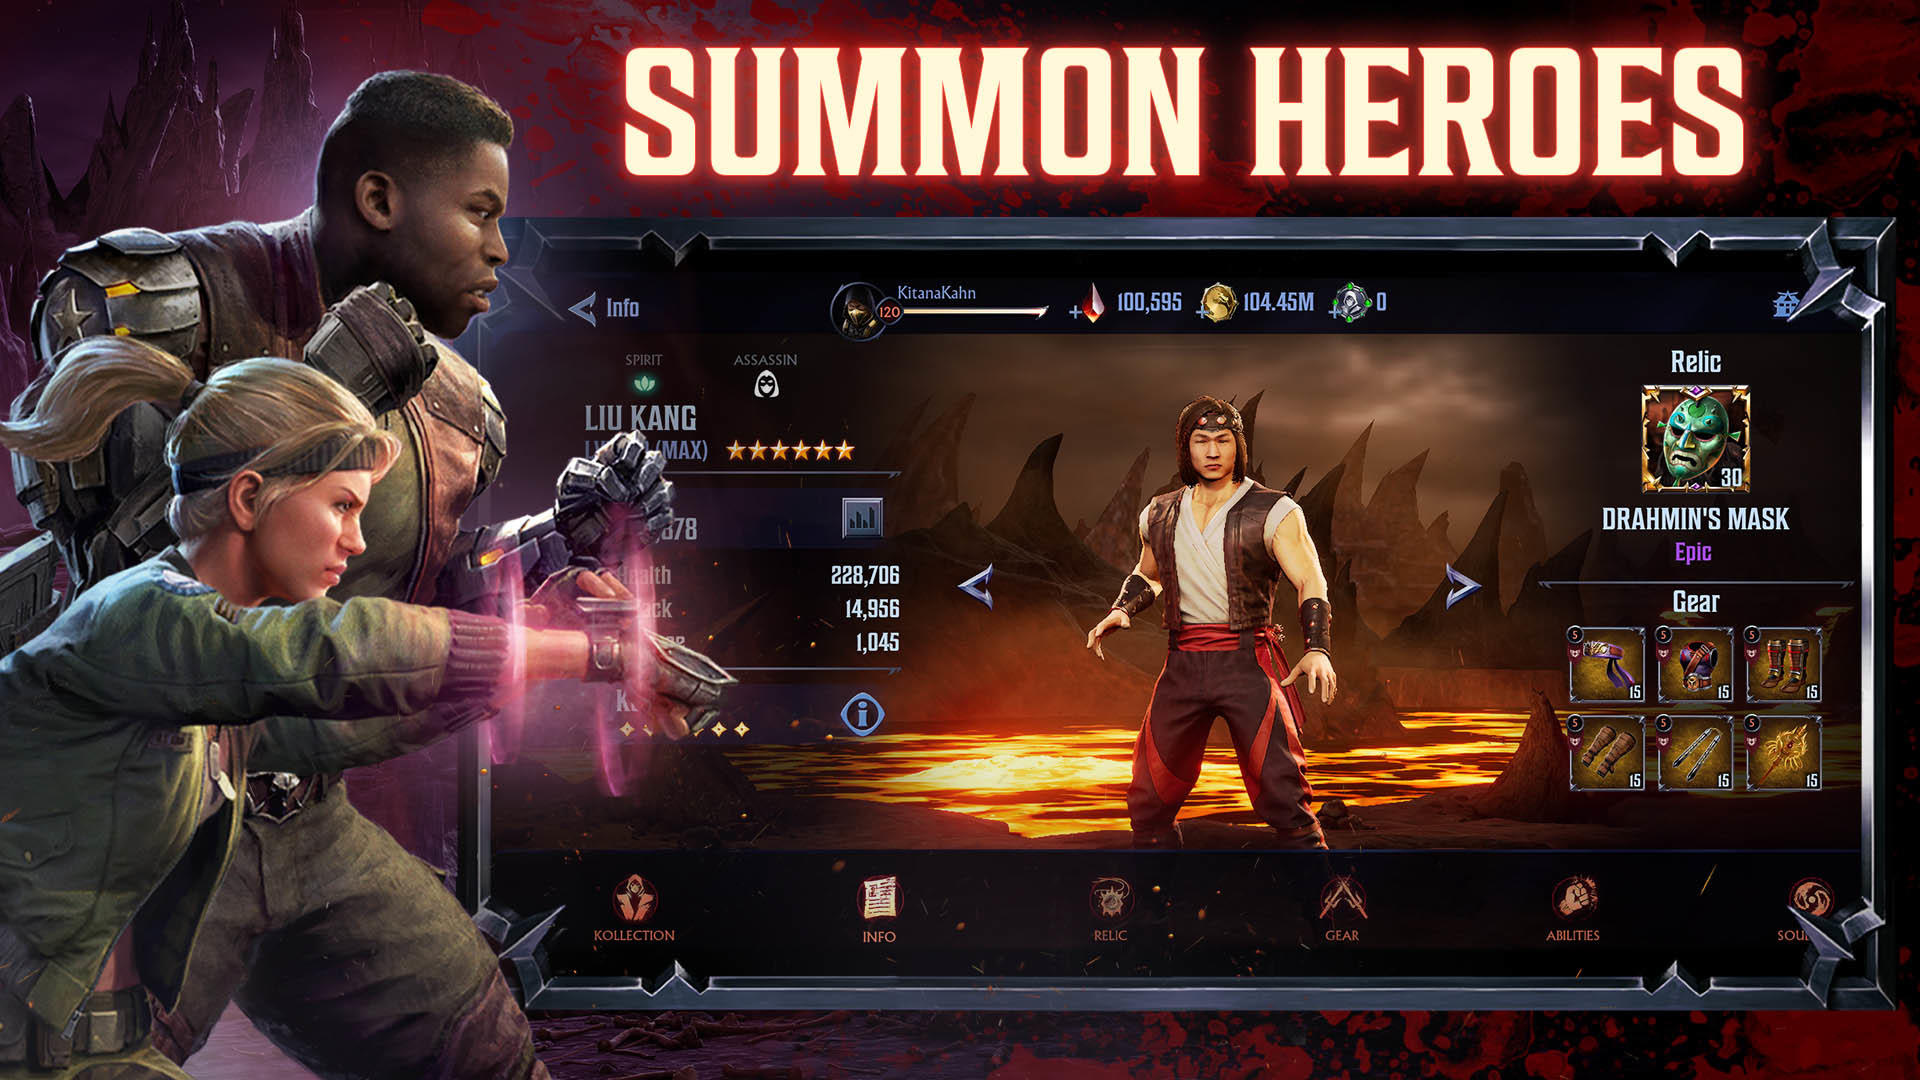 Mortal Kombat: Onslaught launched on Android and iOS - SamMobile